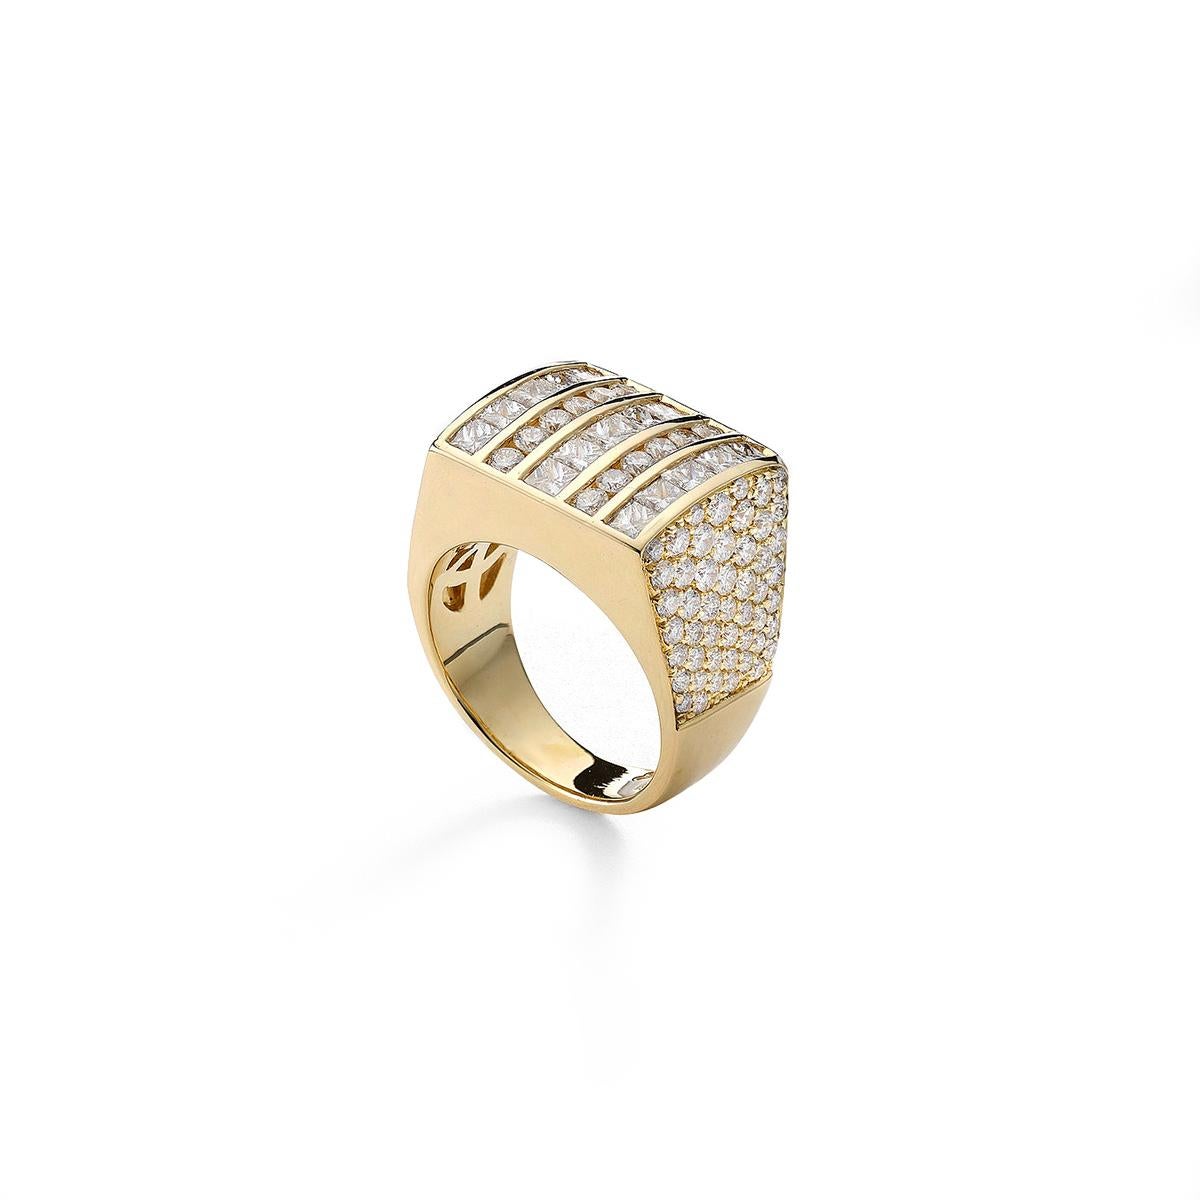 Men's ring in 18kt yellow gold set with 110 diamonds 2.42 cts and 15 princess cut diamonds 1.66 cts Size 55               